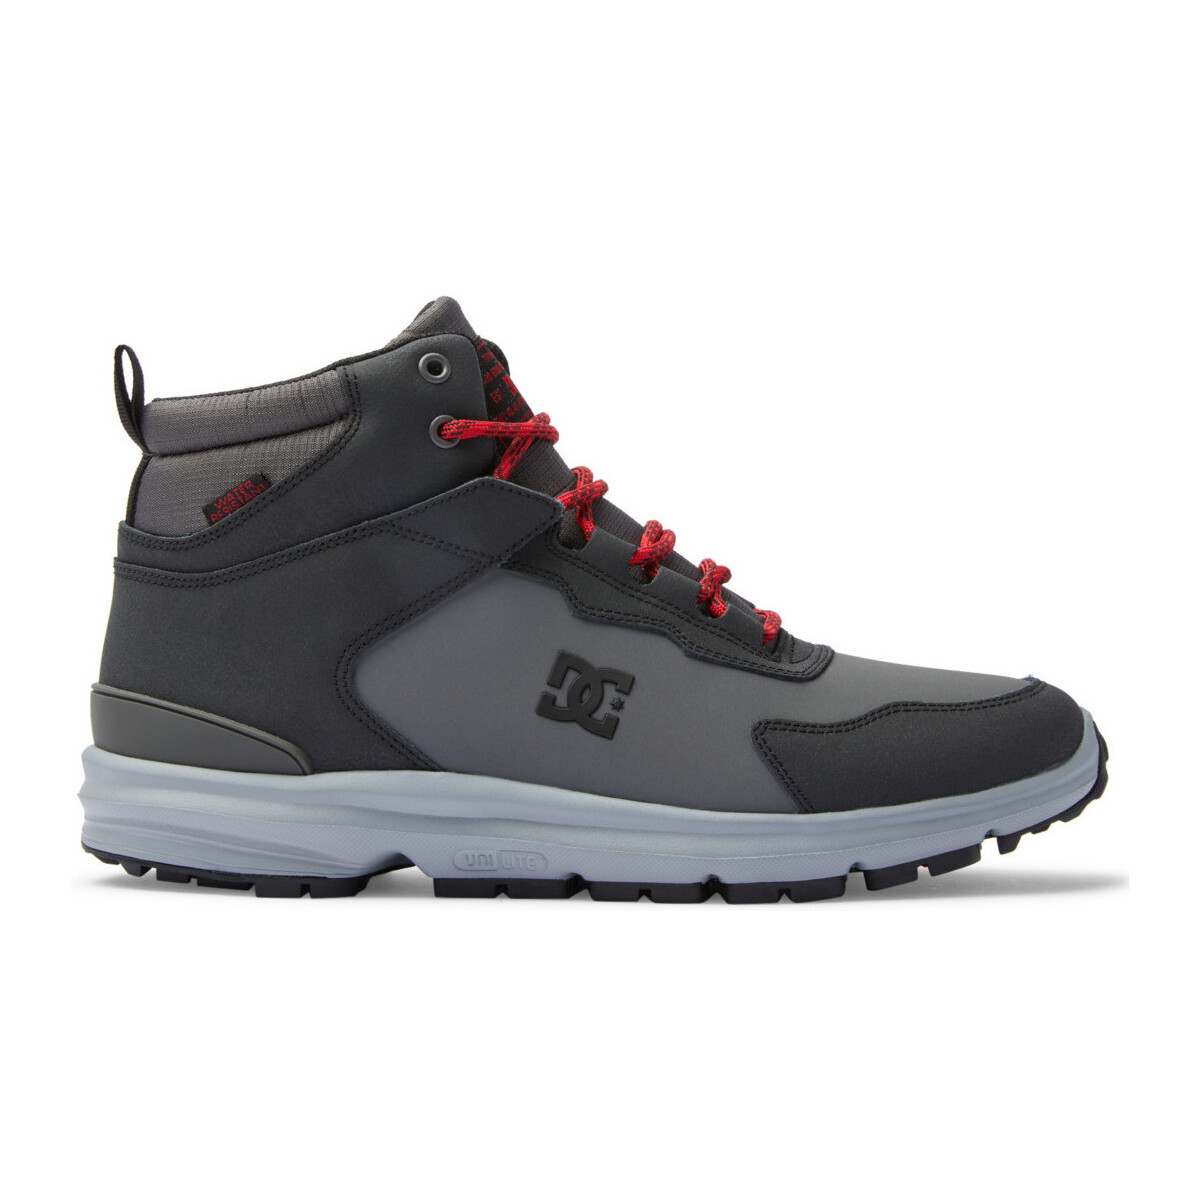 Chaussures Homme Bottes DC Shoes Mutiny Gris